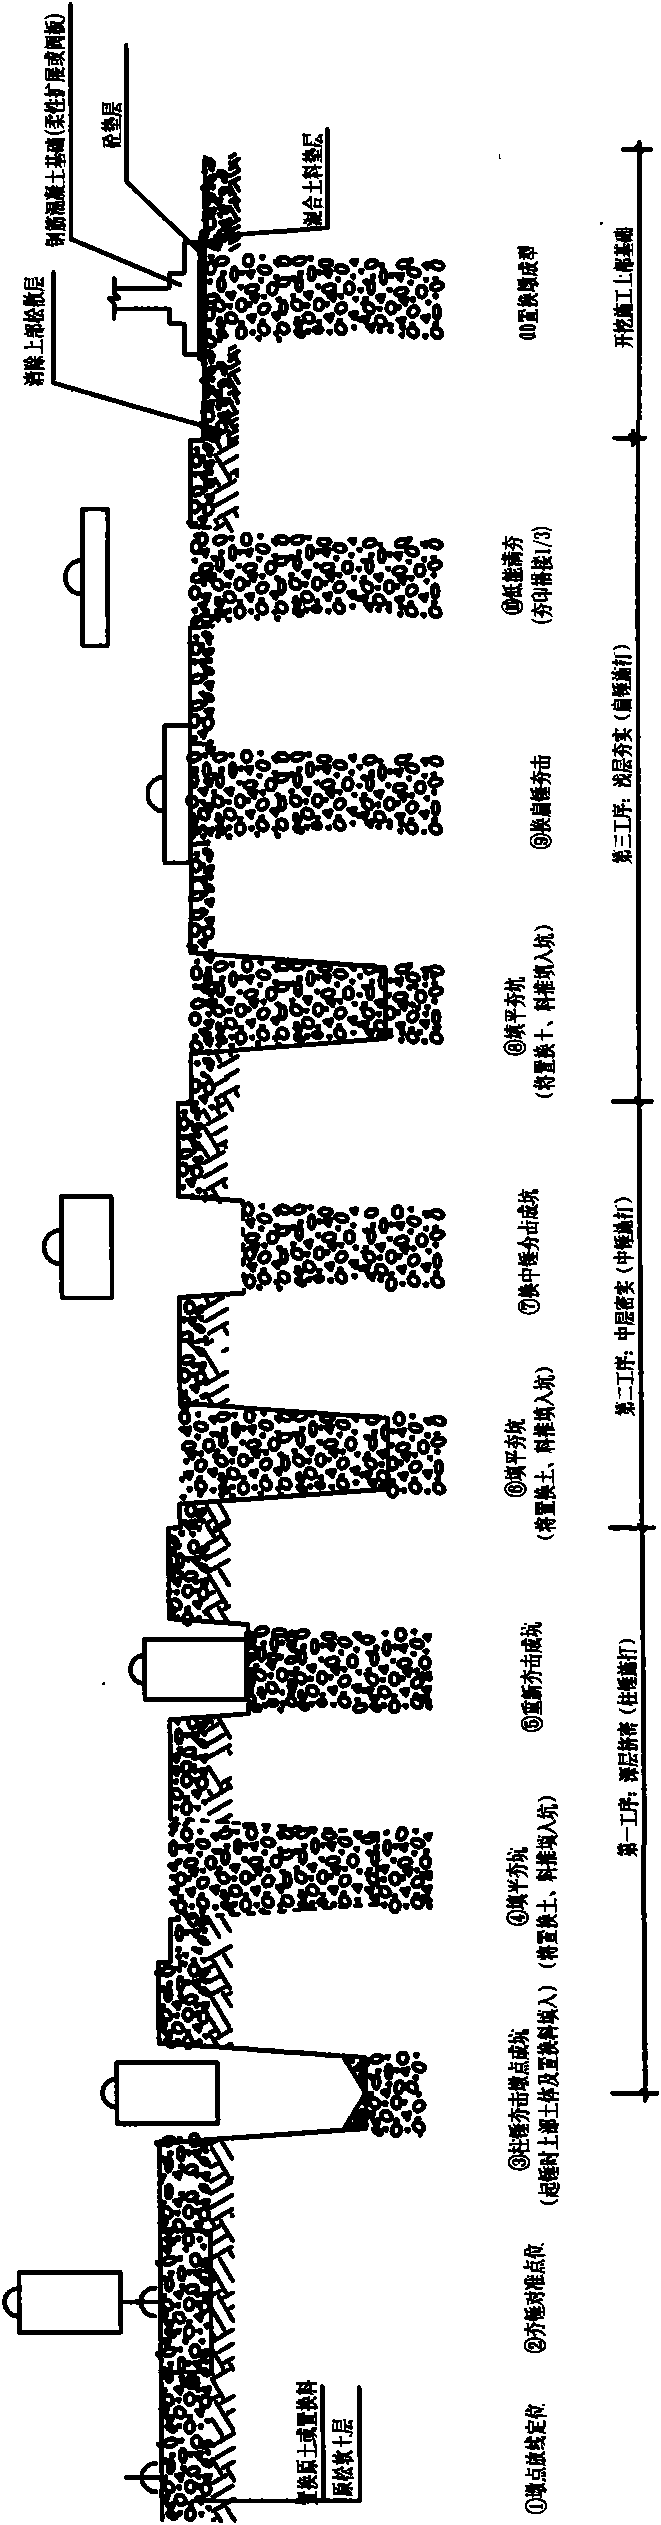 Method for treating foundation by combined hammers